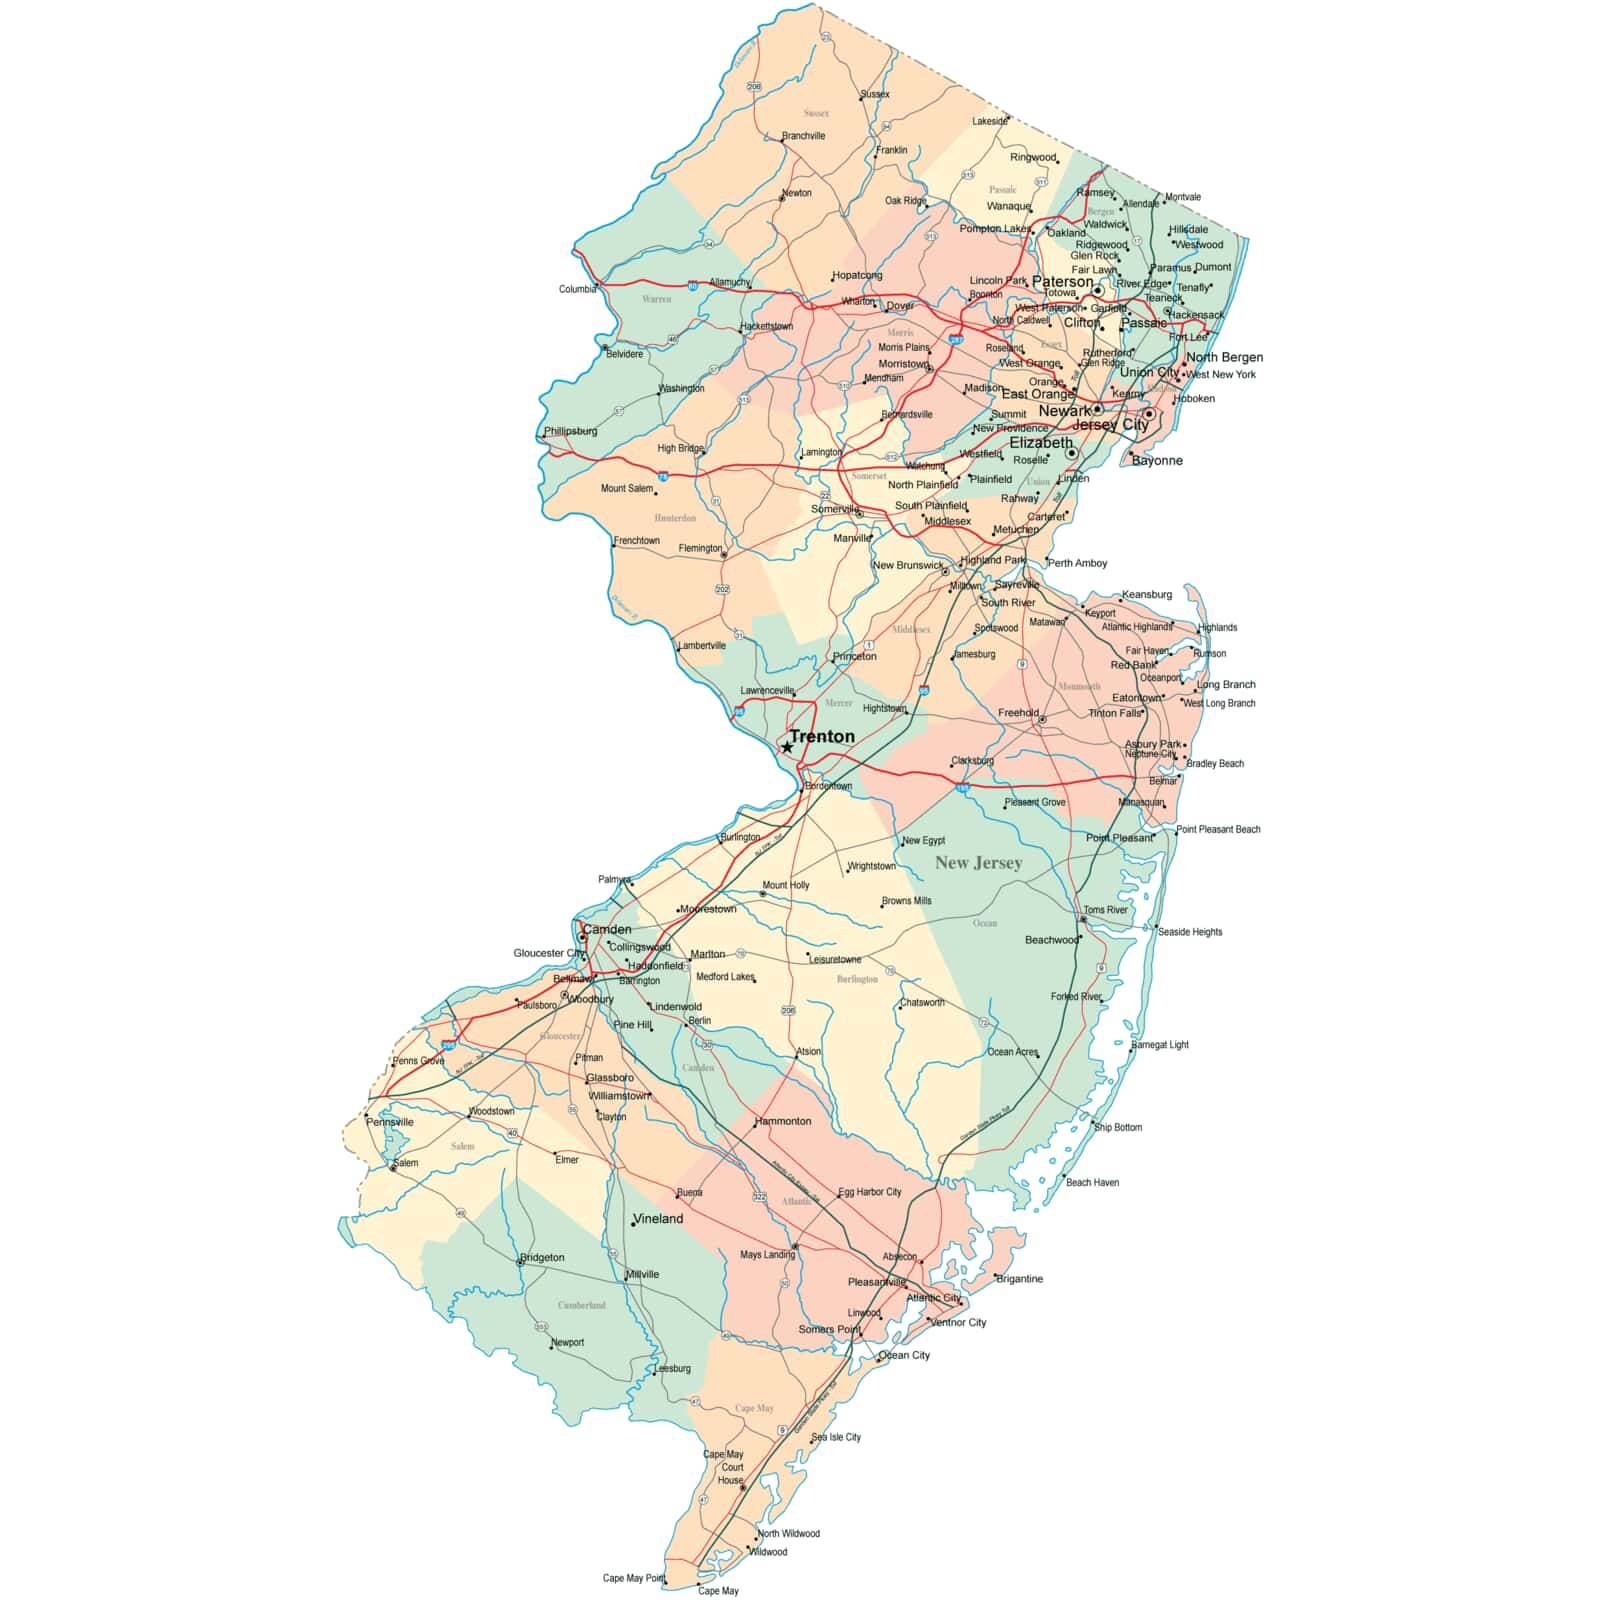 new jersey state map New Jersey Road Map Nj Road Map Nj Highway Map new jersey state map